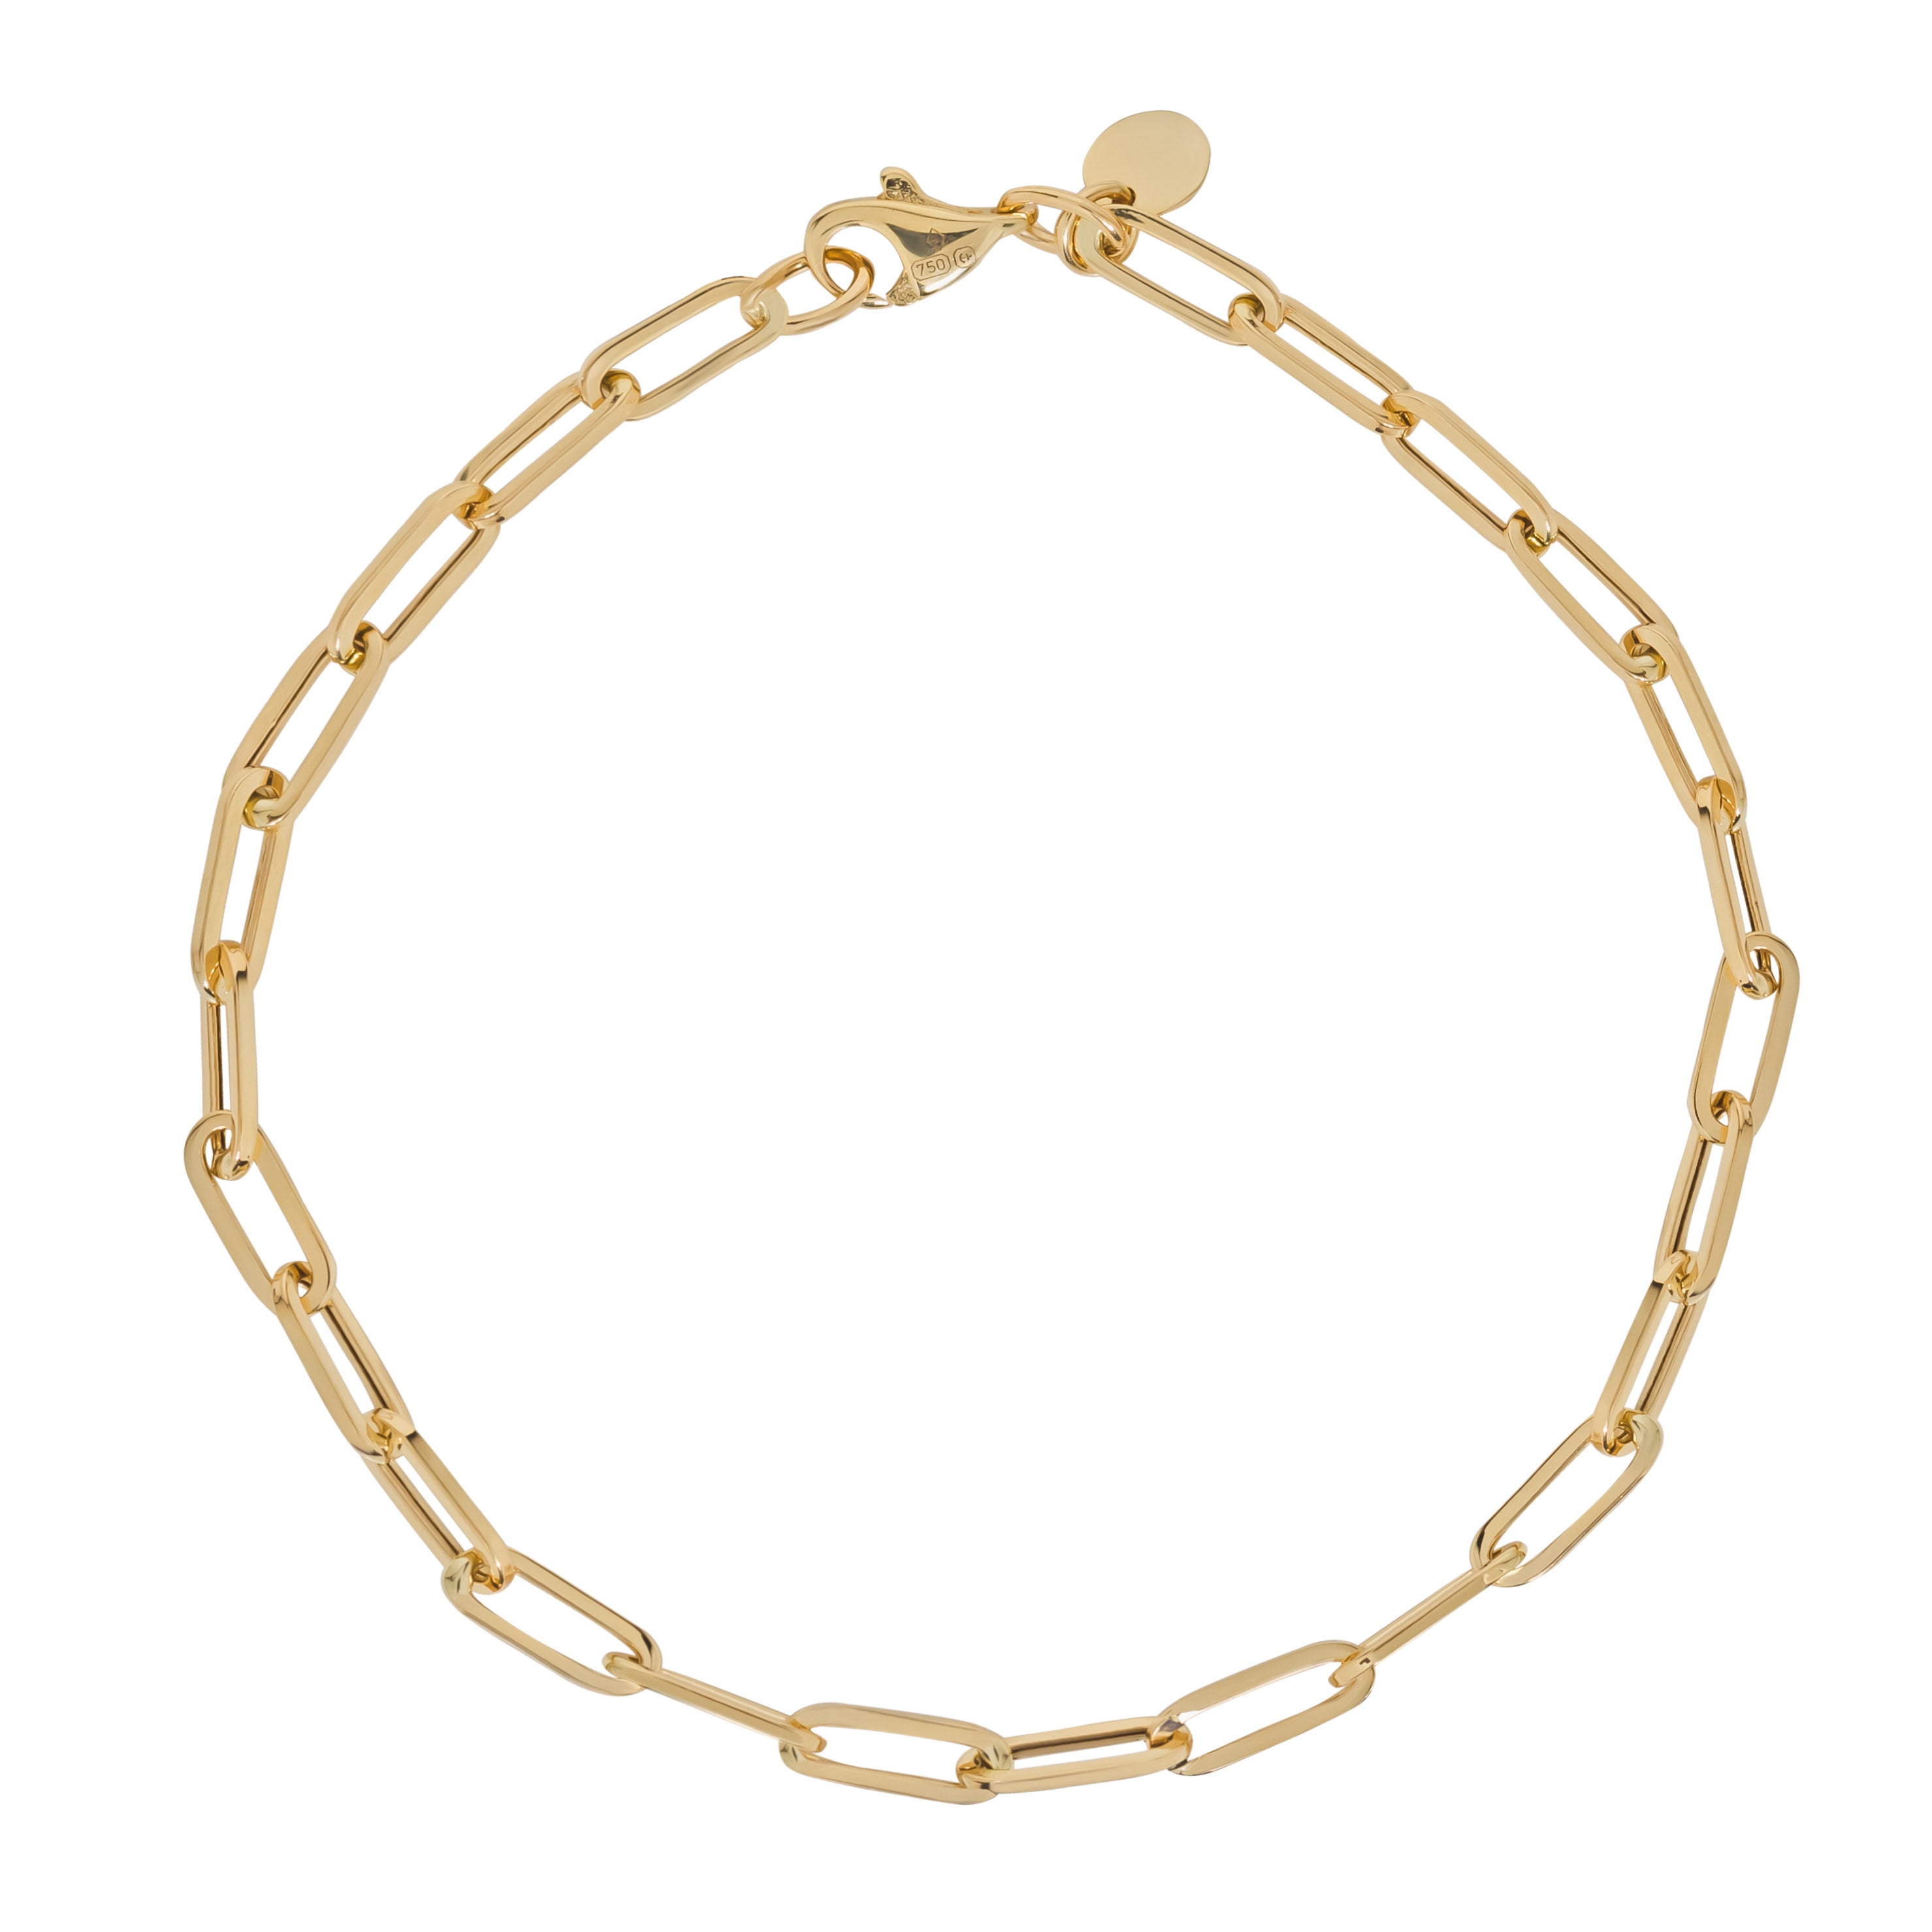 Amazon.co.jp: Tomato Salad K18 Kihei Bracelet, 18K Gold, Six Sided Double  (39.4 - 8.3 inches (100 g - 21 cm) Clasp (Medium Fold), 0.4 inches (11 mm),  6 Sides, 6 Sides, Double